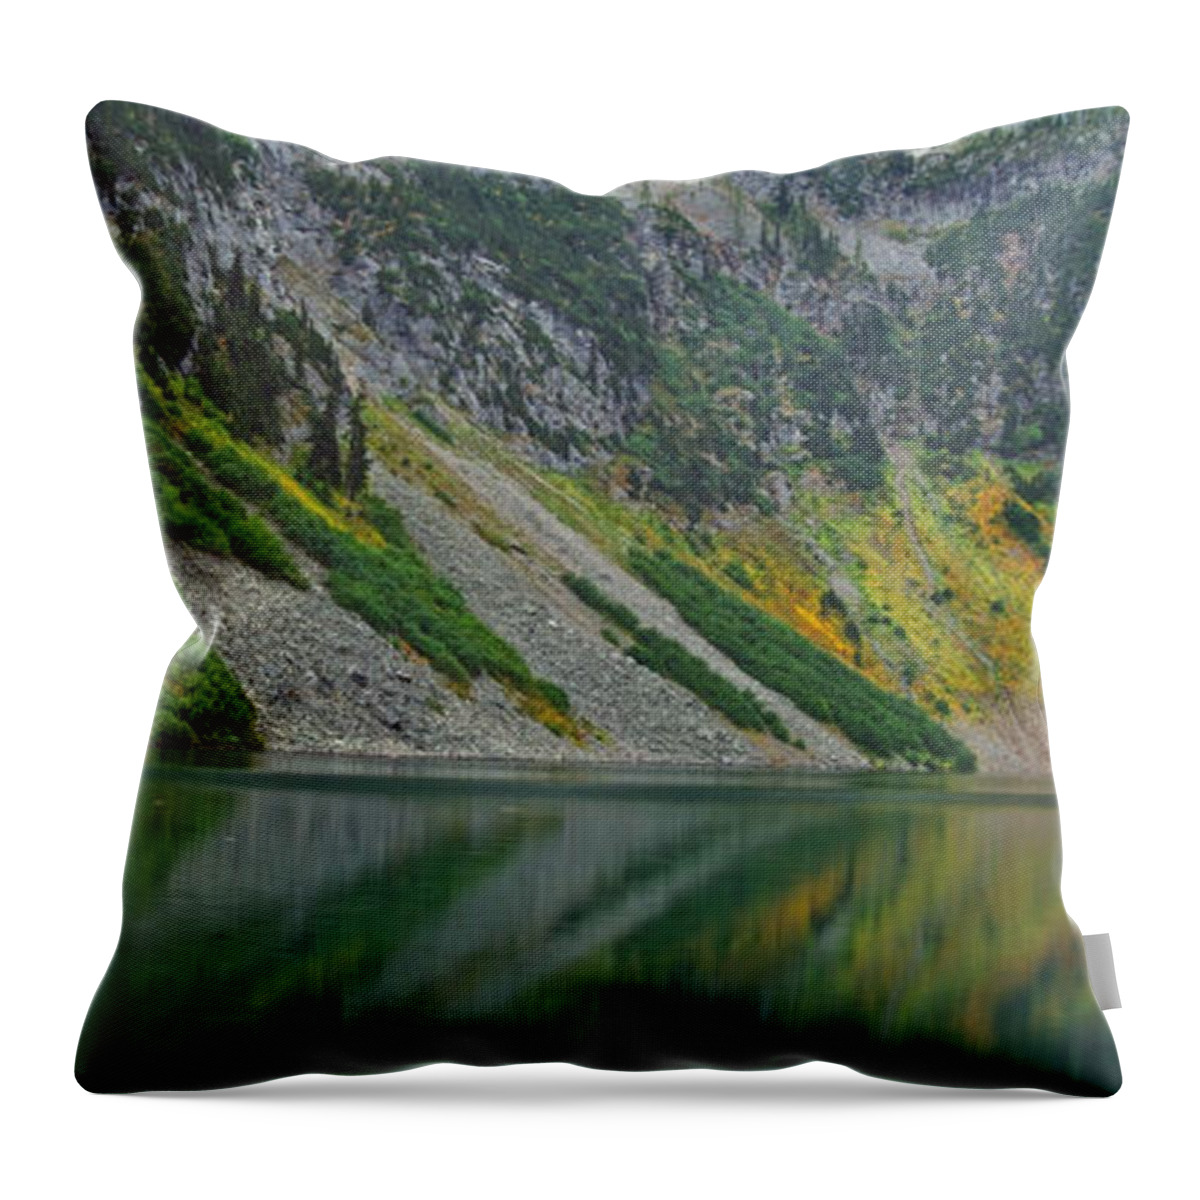 Rainy Throw Pillow featuring the photograph Cascades Rainy Lake 9160 by Michael Peychich